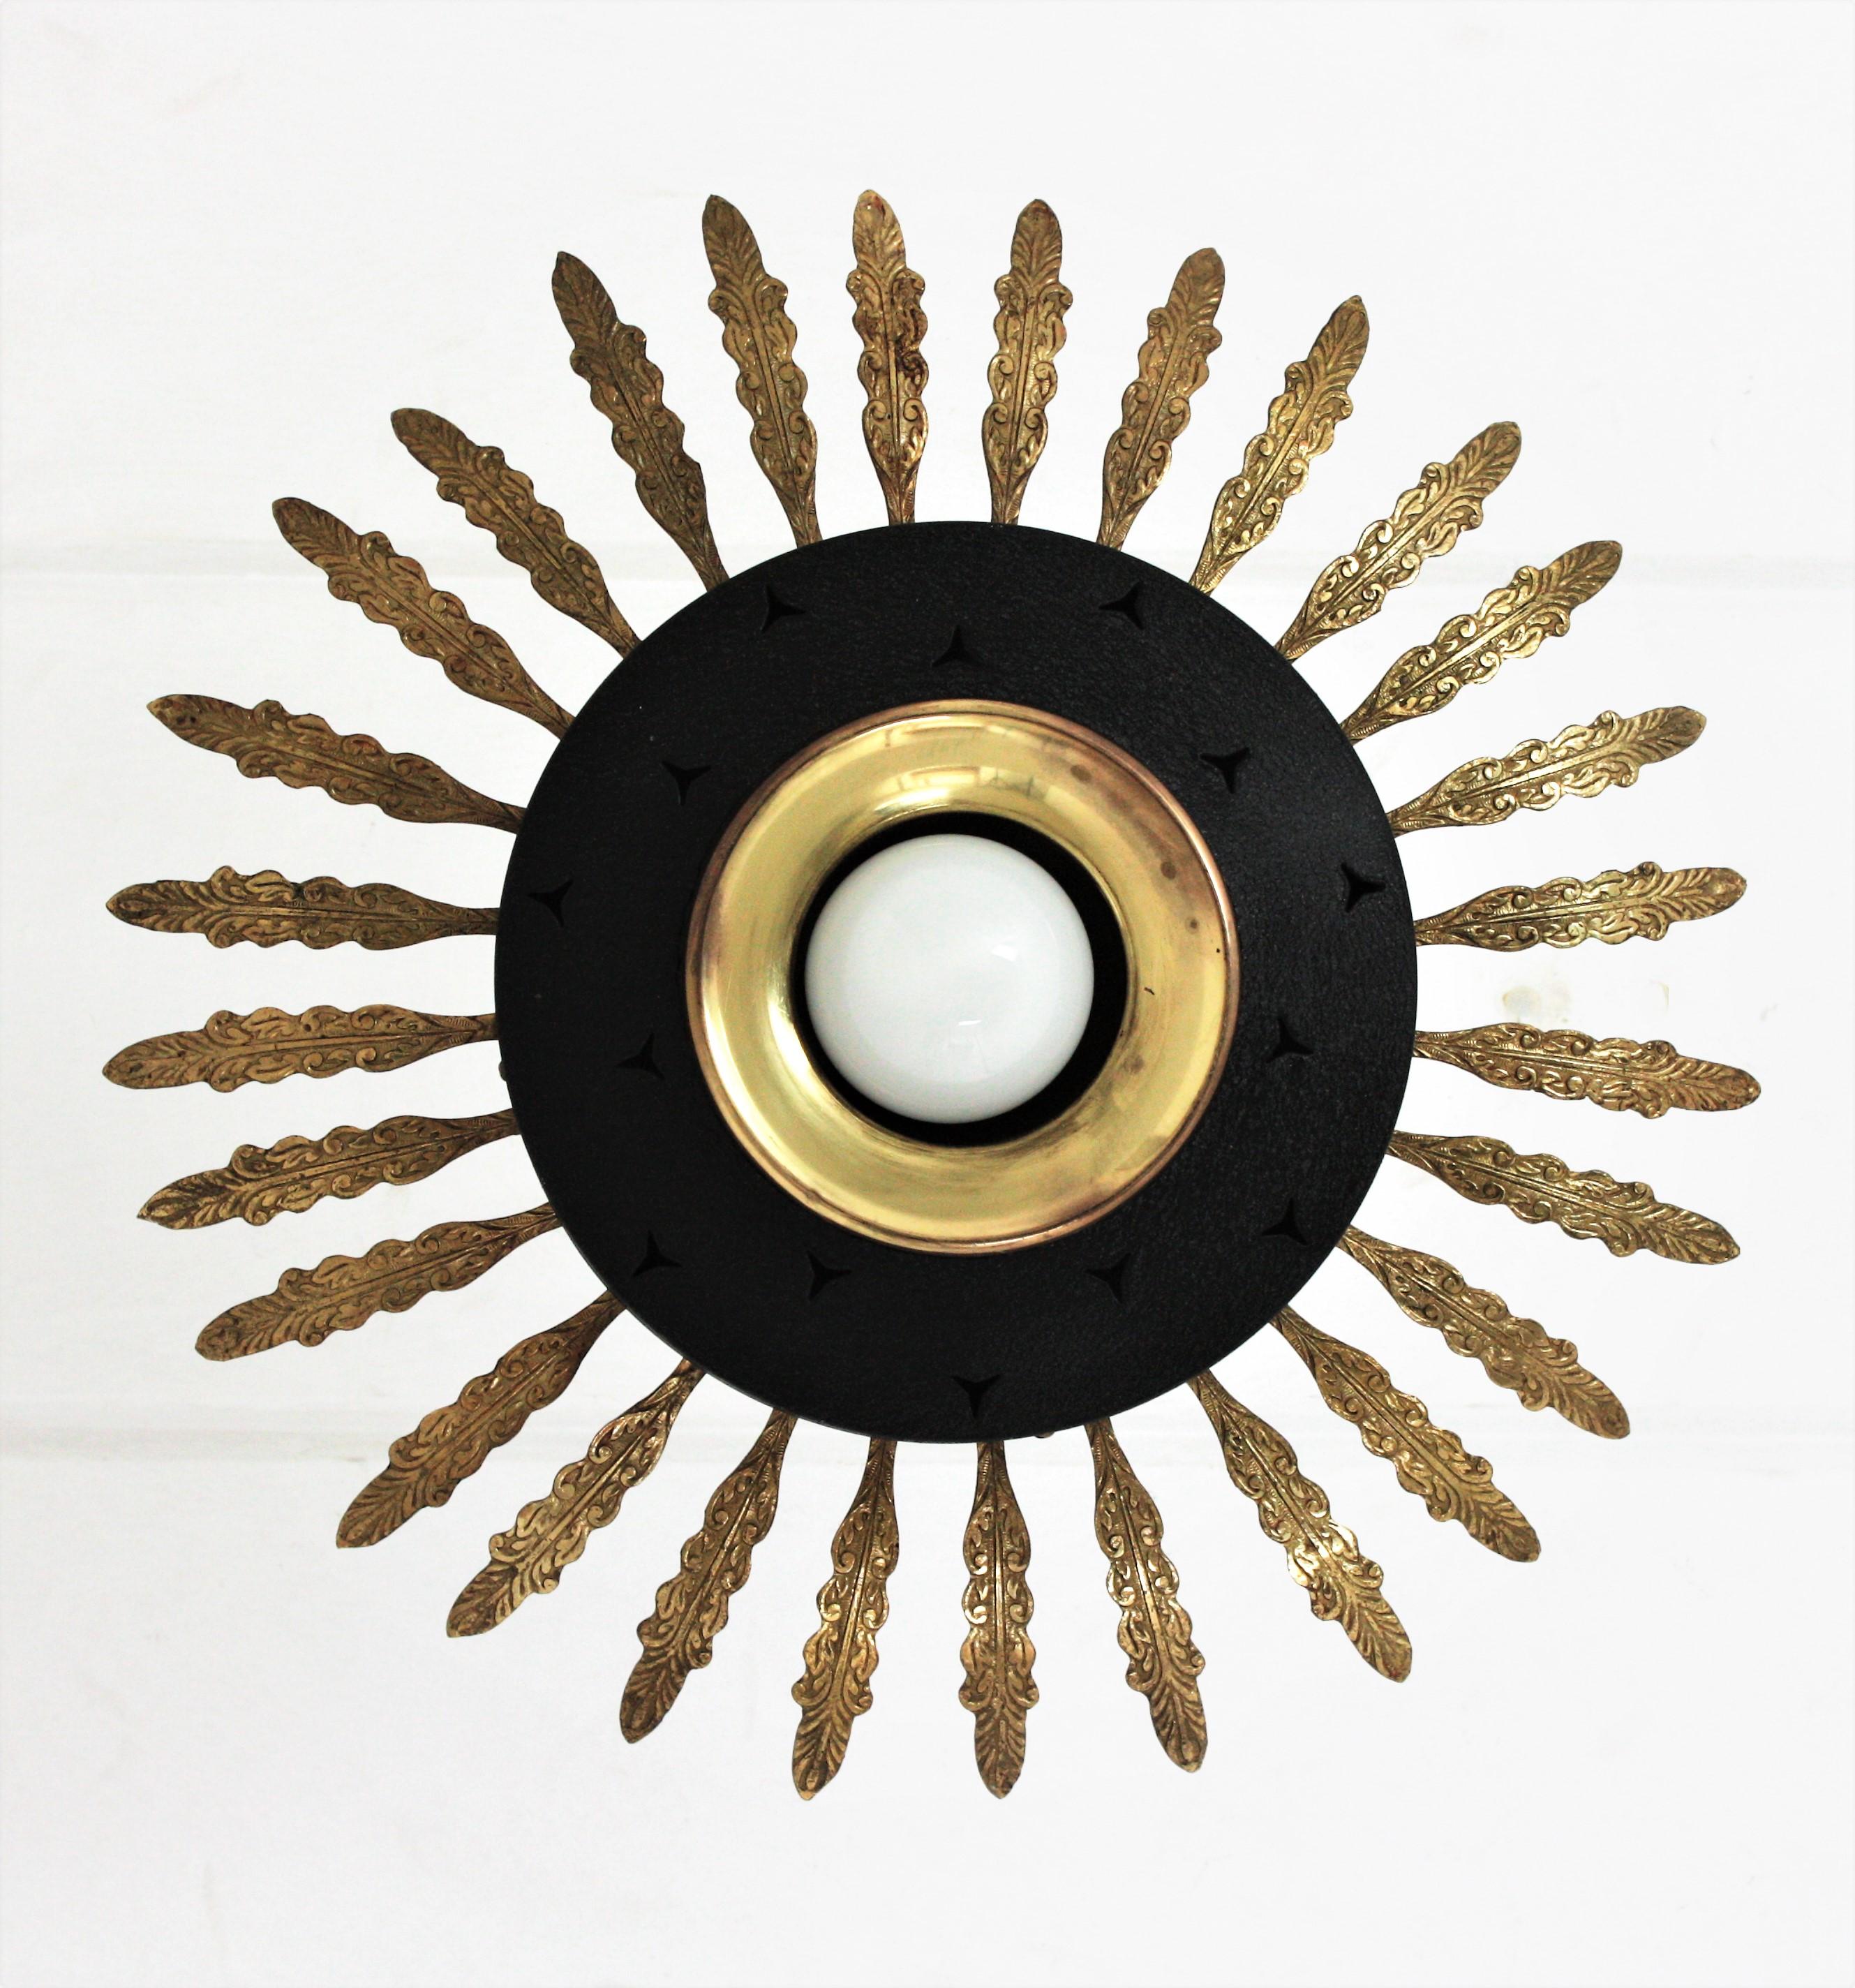 Mid-Century Modern black lacquered metal and brass sunburst suspension light, chandelier or light fixture, Italy, 1950s.
This eye-catching ceiling lamp features a black lacquered metal shade surrounded by brass leaves with foliate and scroll